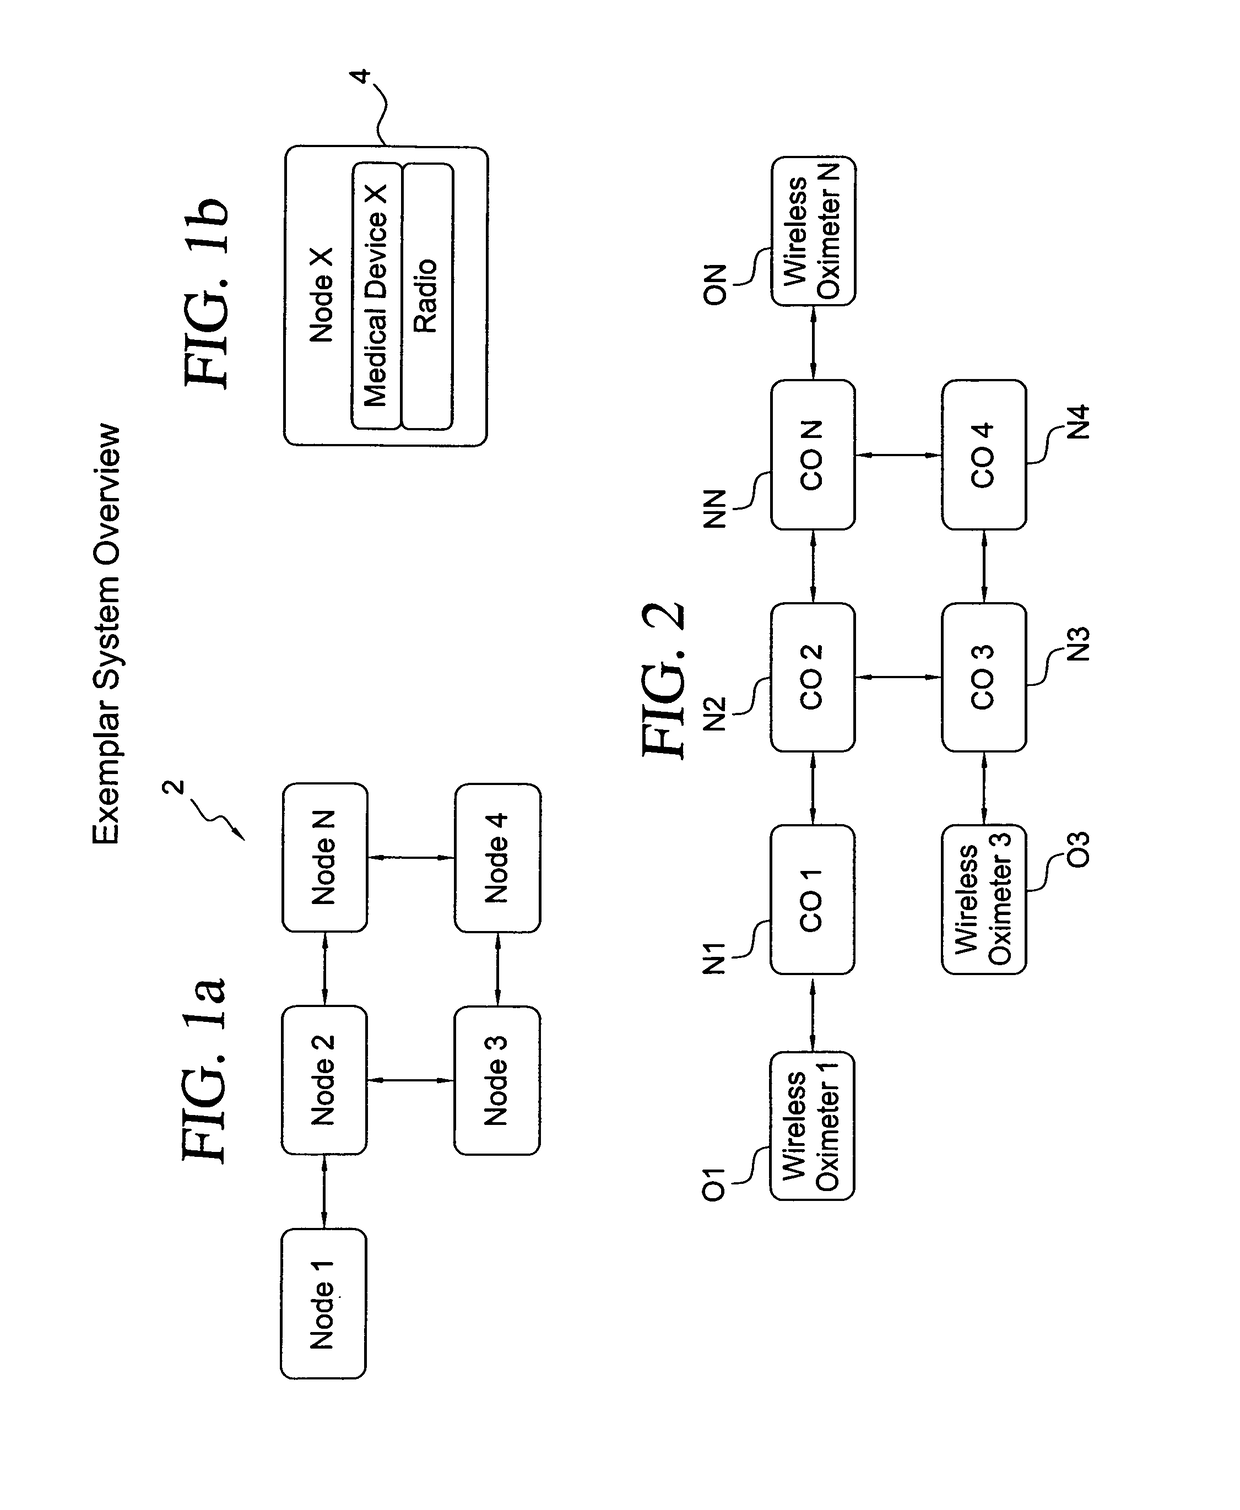 Method for establishing a telecommunications system for patient monitoring